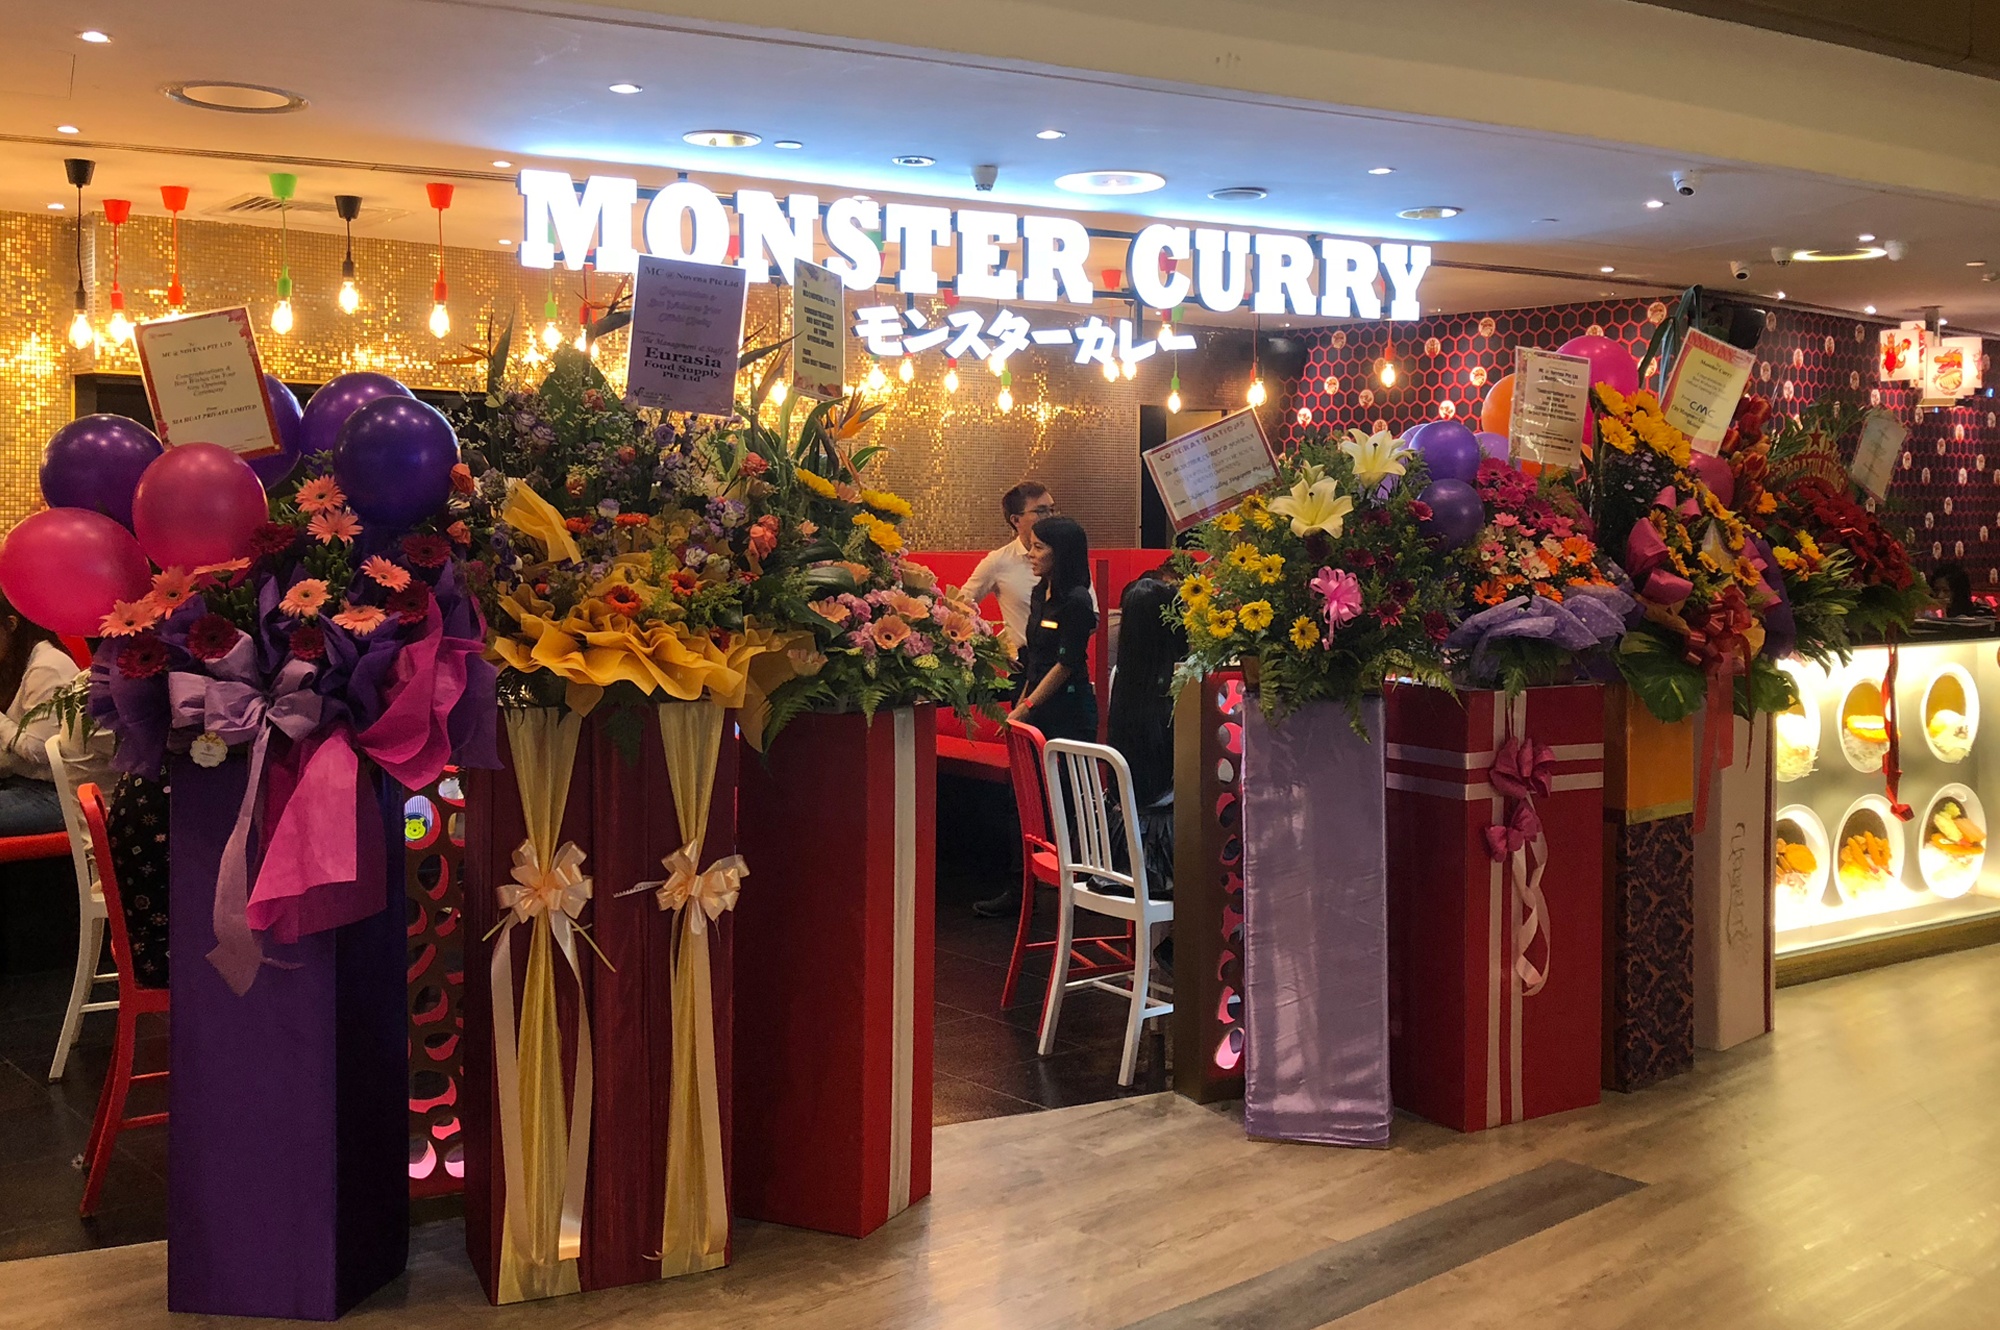 Monster Curry at Velocity @ Novena Square